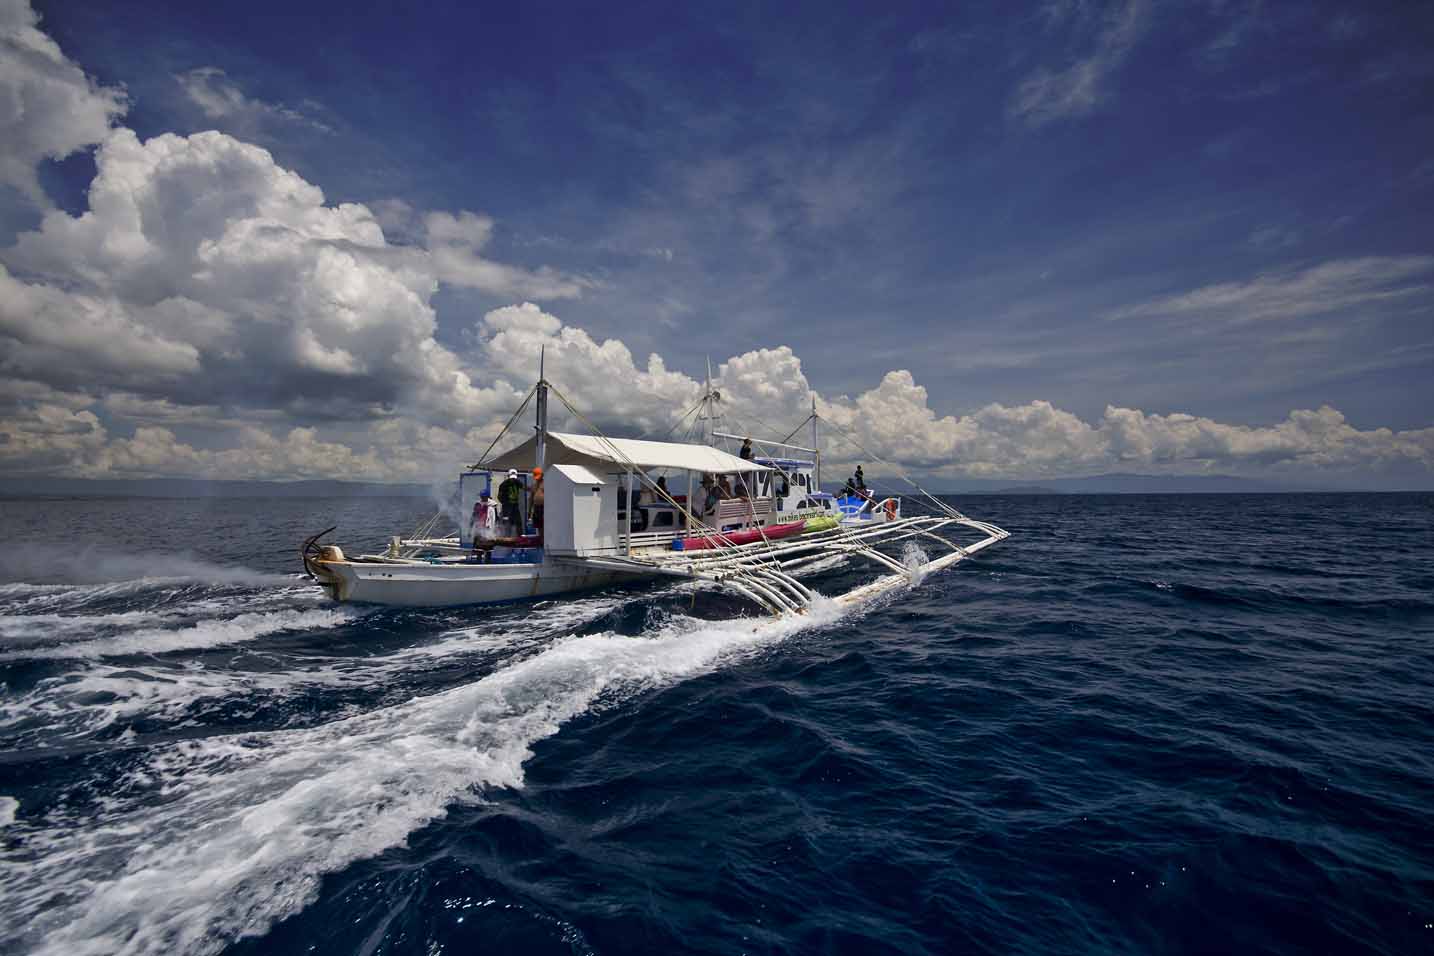 One of our two Banca dive boats